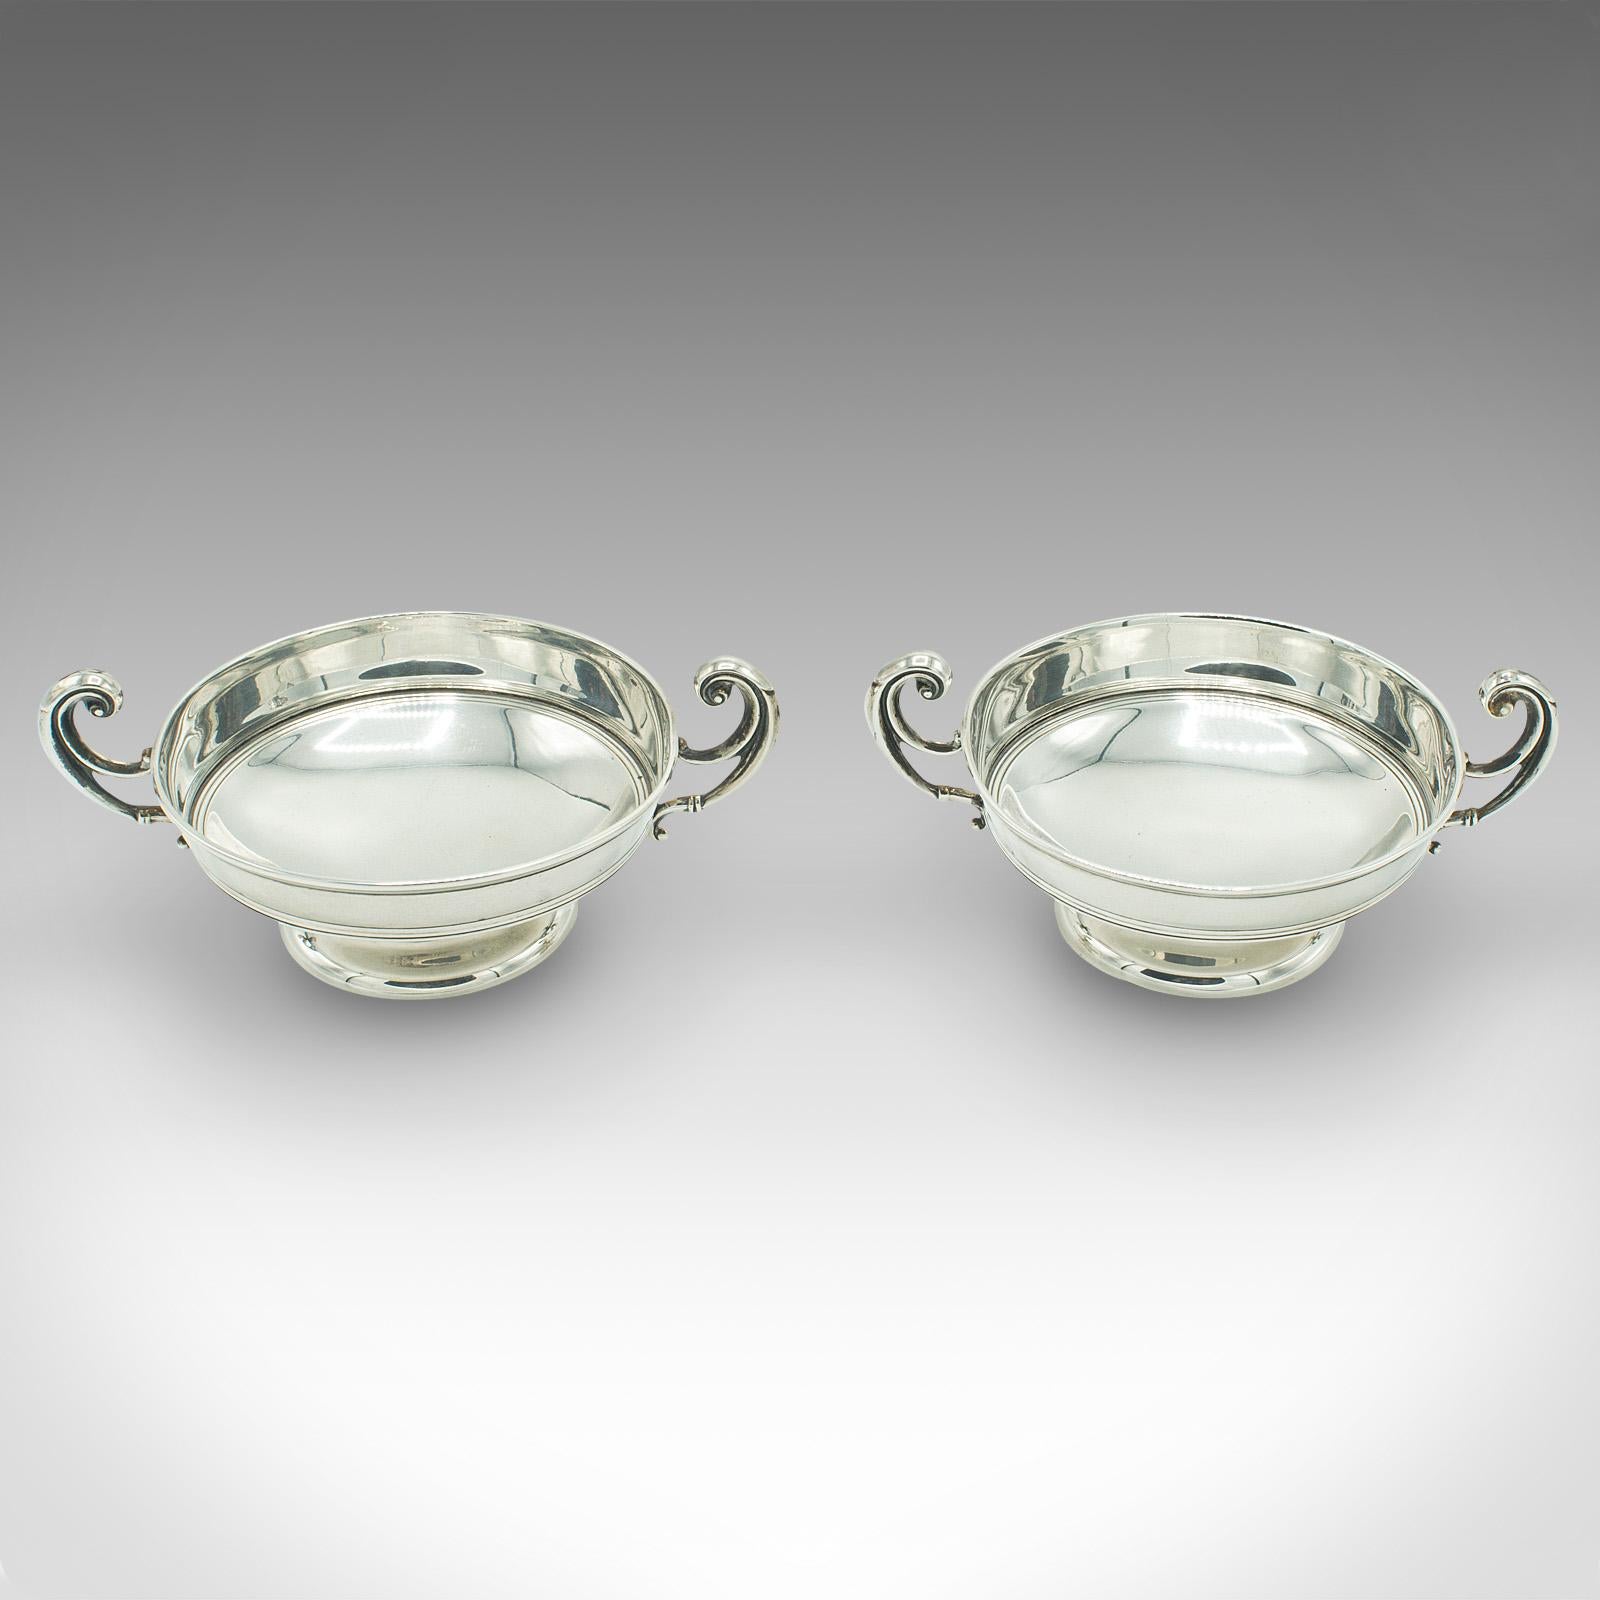 This is a pair of antique bonbon dishes. An English, sterling silver serving bowl, dating to the Edwardian period, hallmarked in 1909.

Elegant and petite, ideal for the sideboard or mantlepiece
Displaying a desirable aged patina and in good